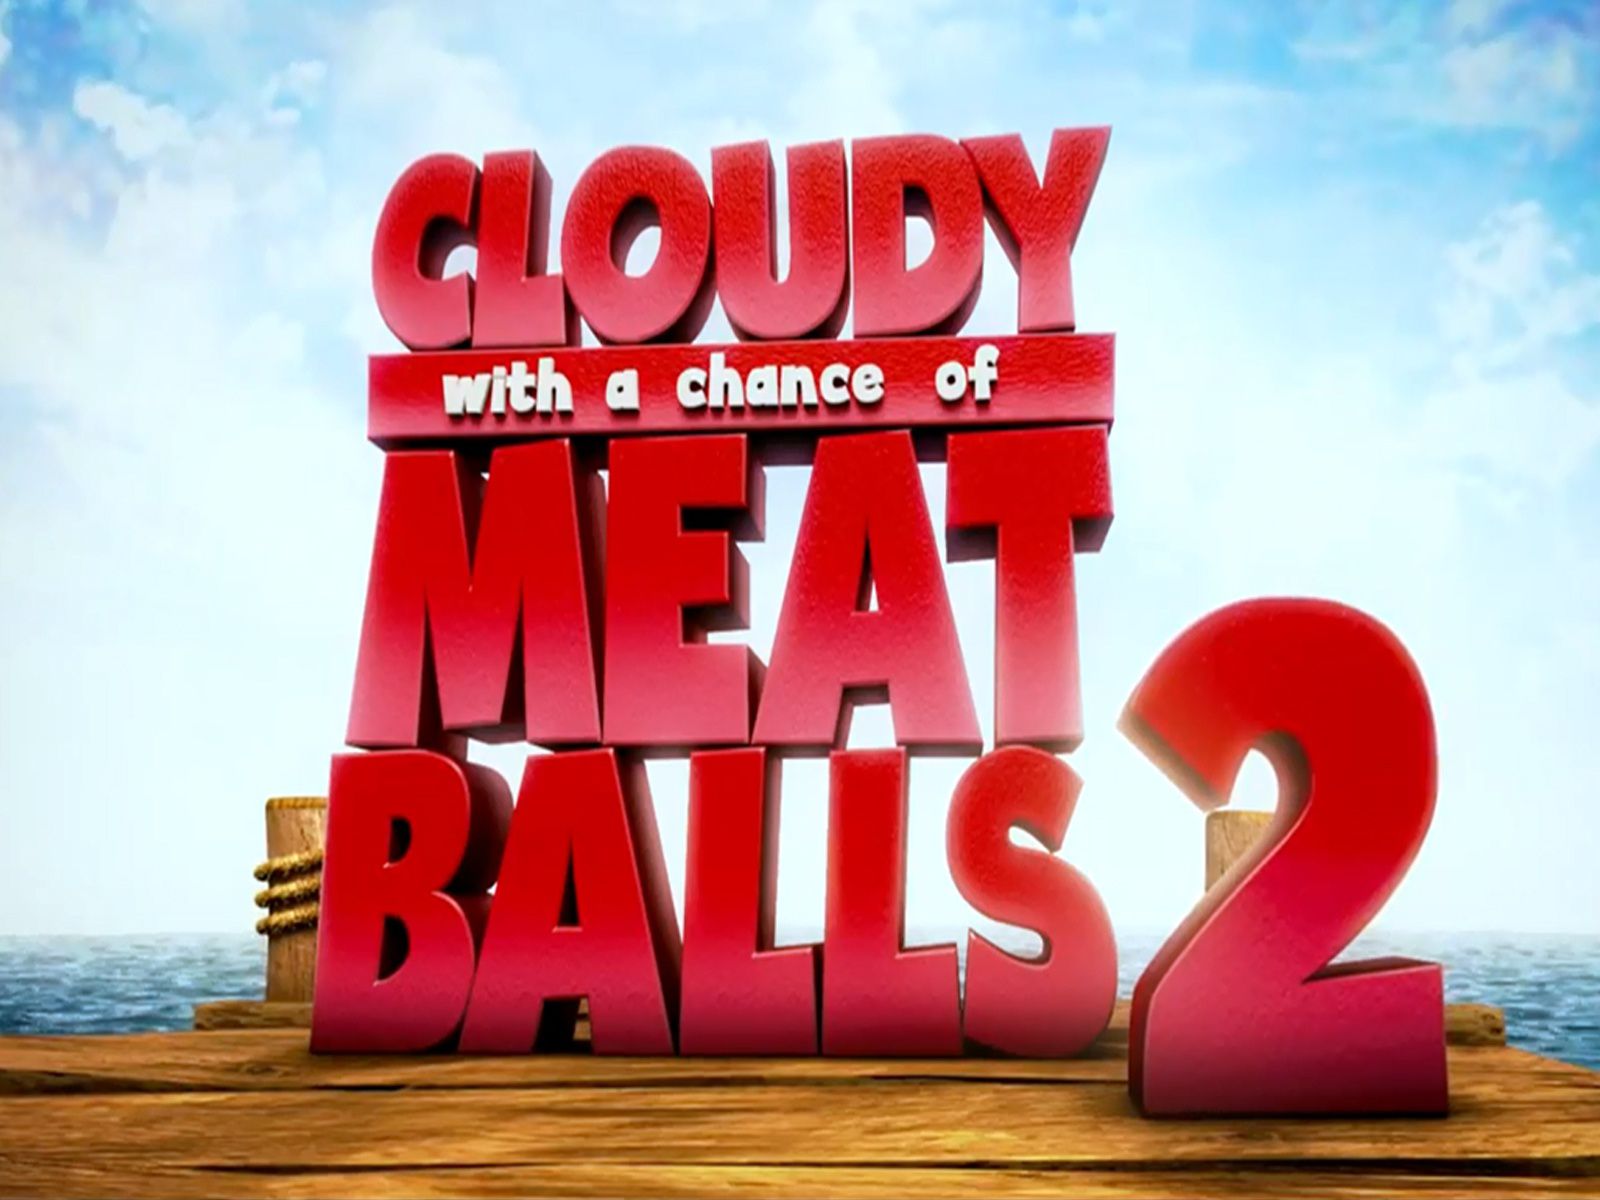 movie, cloudy with a chance of meatballs 2, cloudy with a chance of meatballs